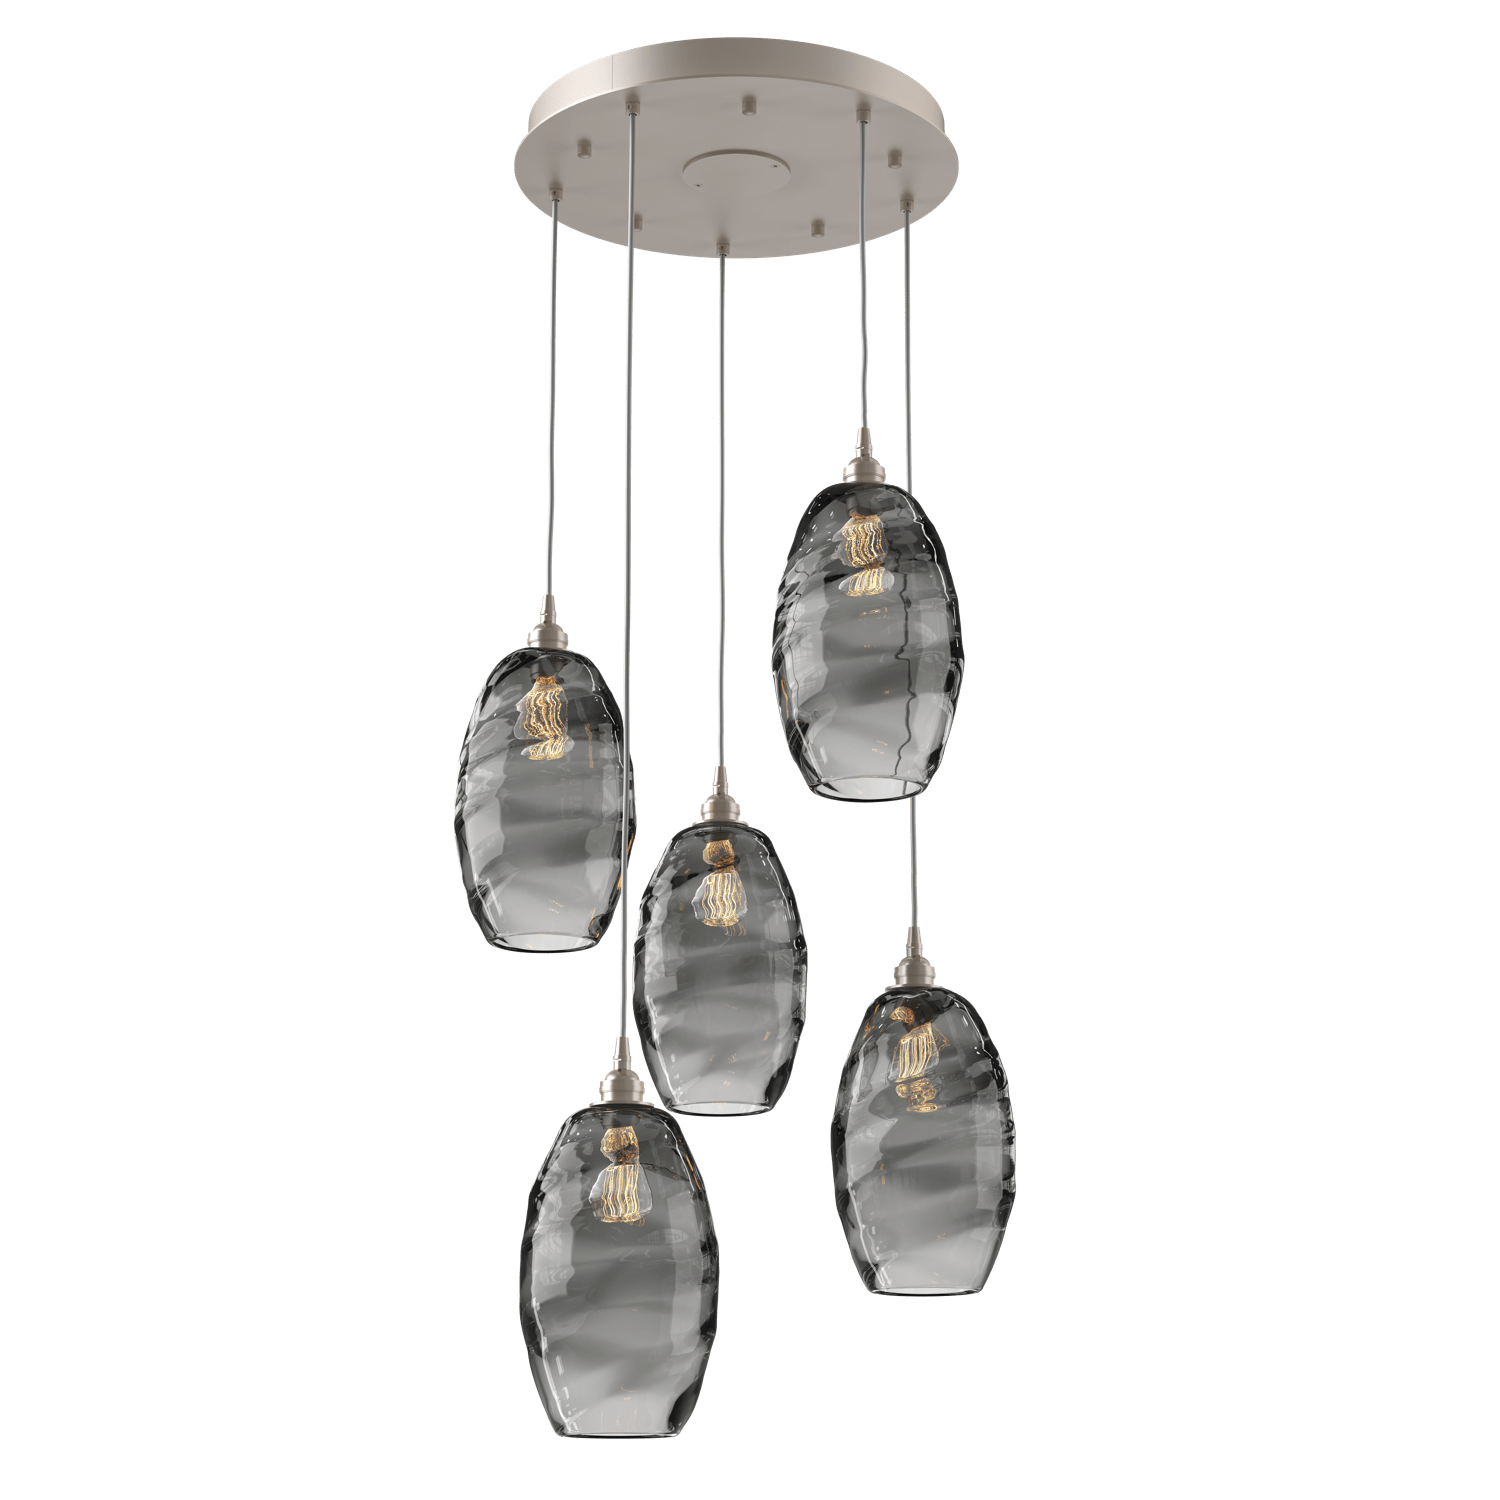 CHB0035-05-BS-OS-Hammerton-Studio-Optic-Blown-Glass-Elisse-5-light-round-pendant-chandelier-with-metallic-beige-silver-finish-and-optic-smoke-blown-glass-shades-and-incandescent-lamping